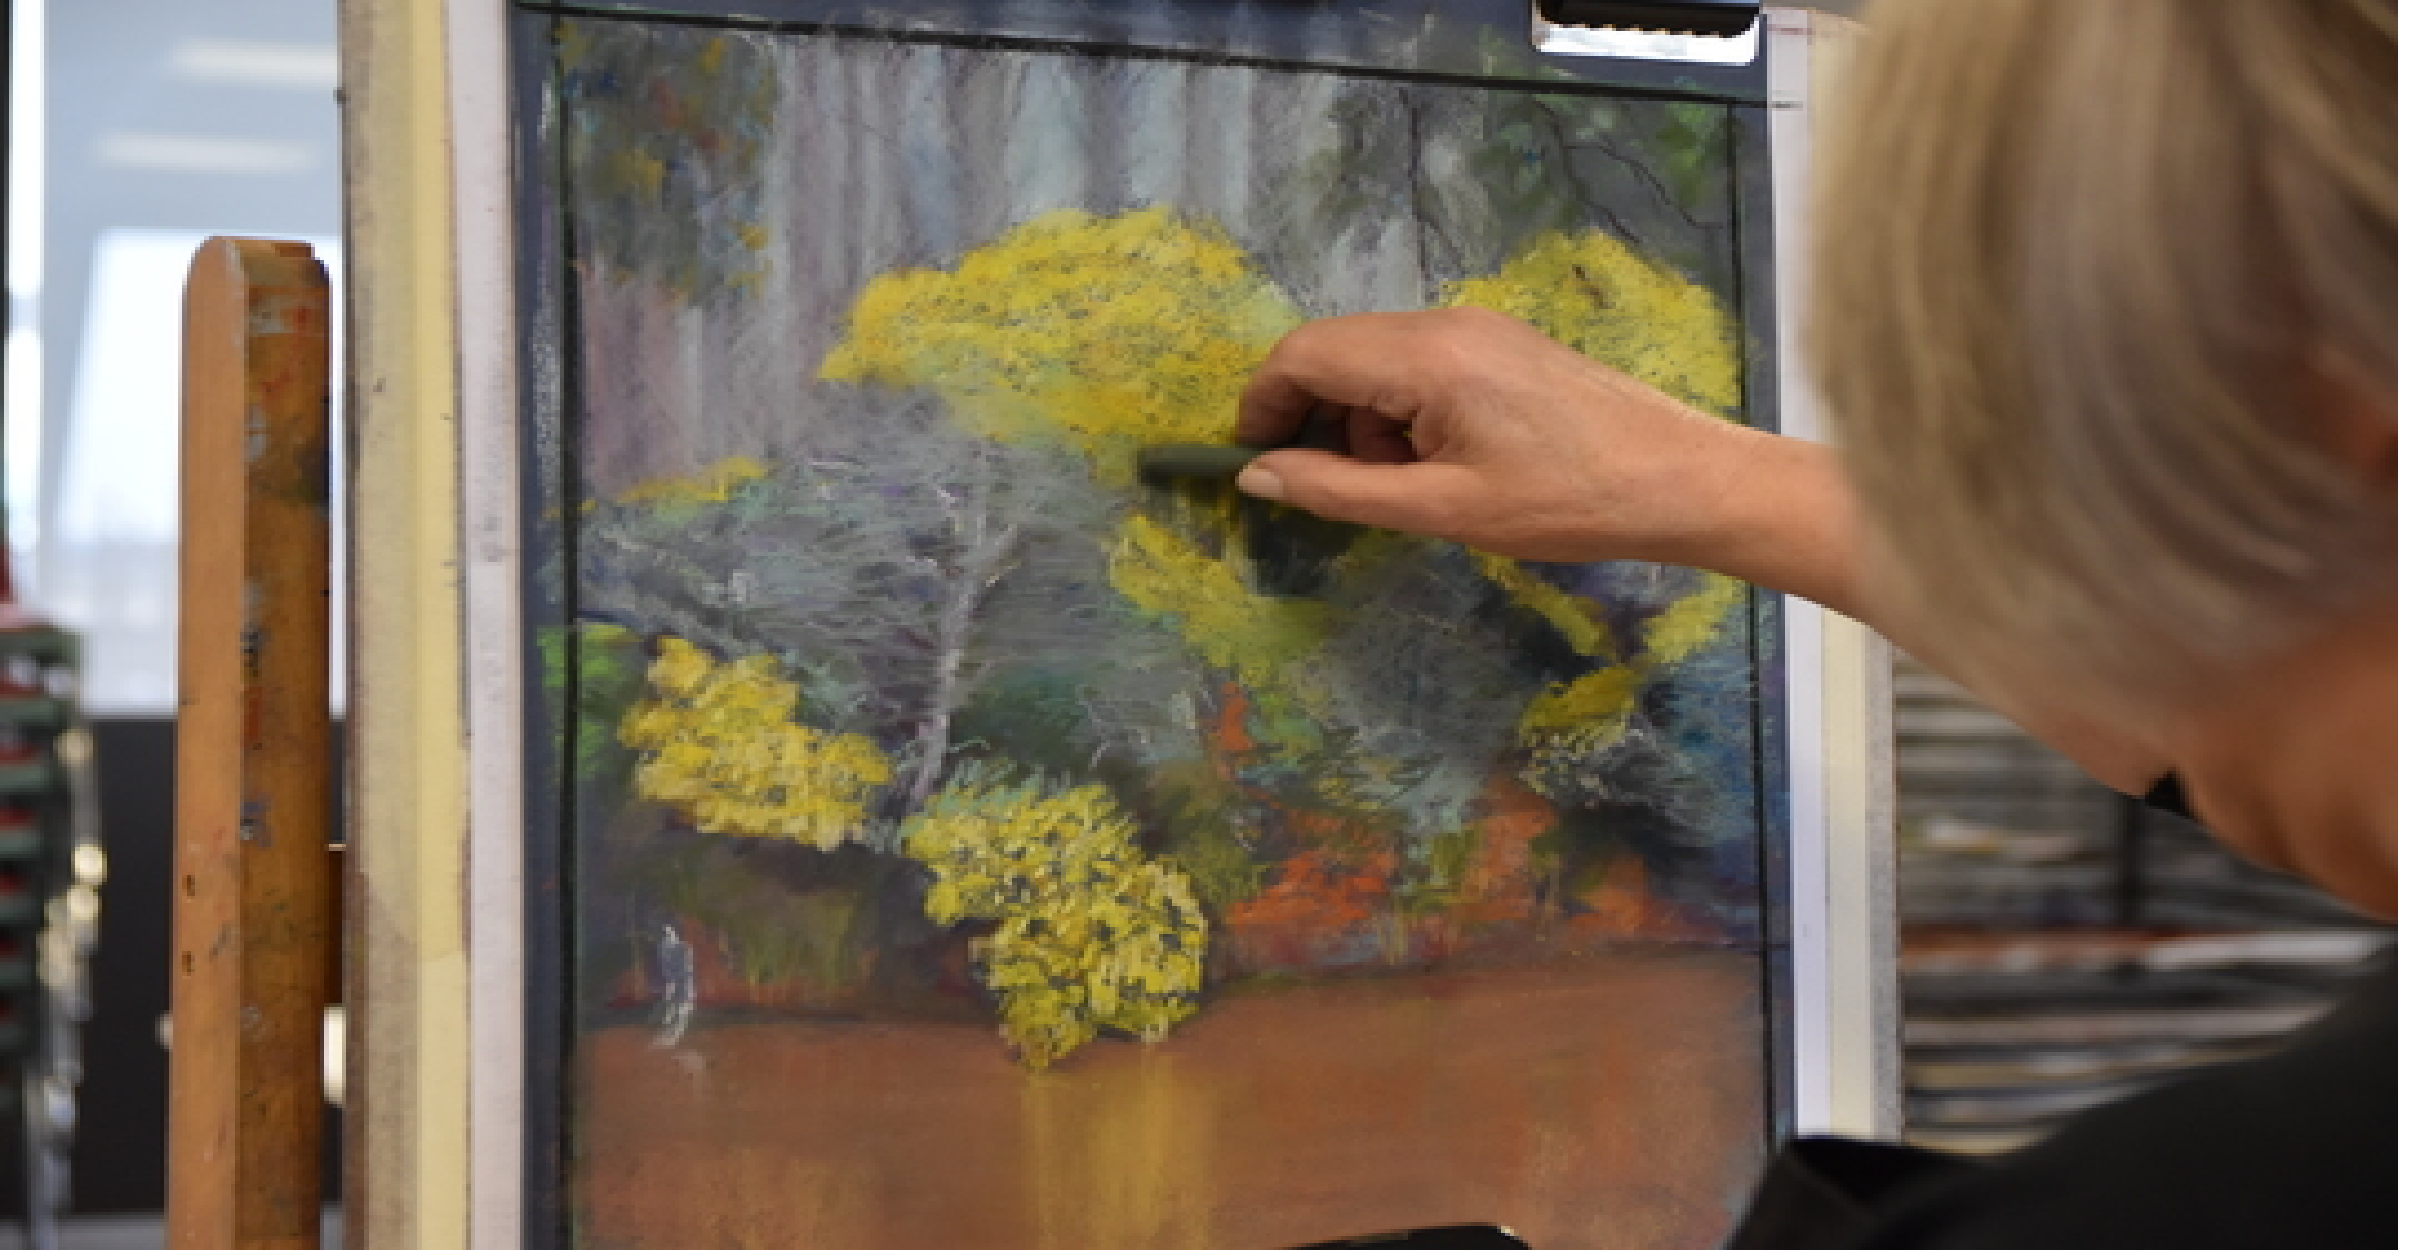 photo of a person sketching a landscape with yellow flowers and foliage in pastel